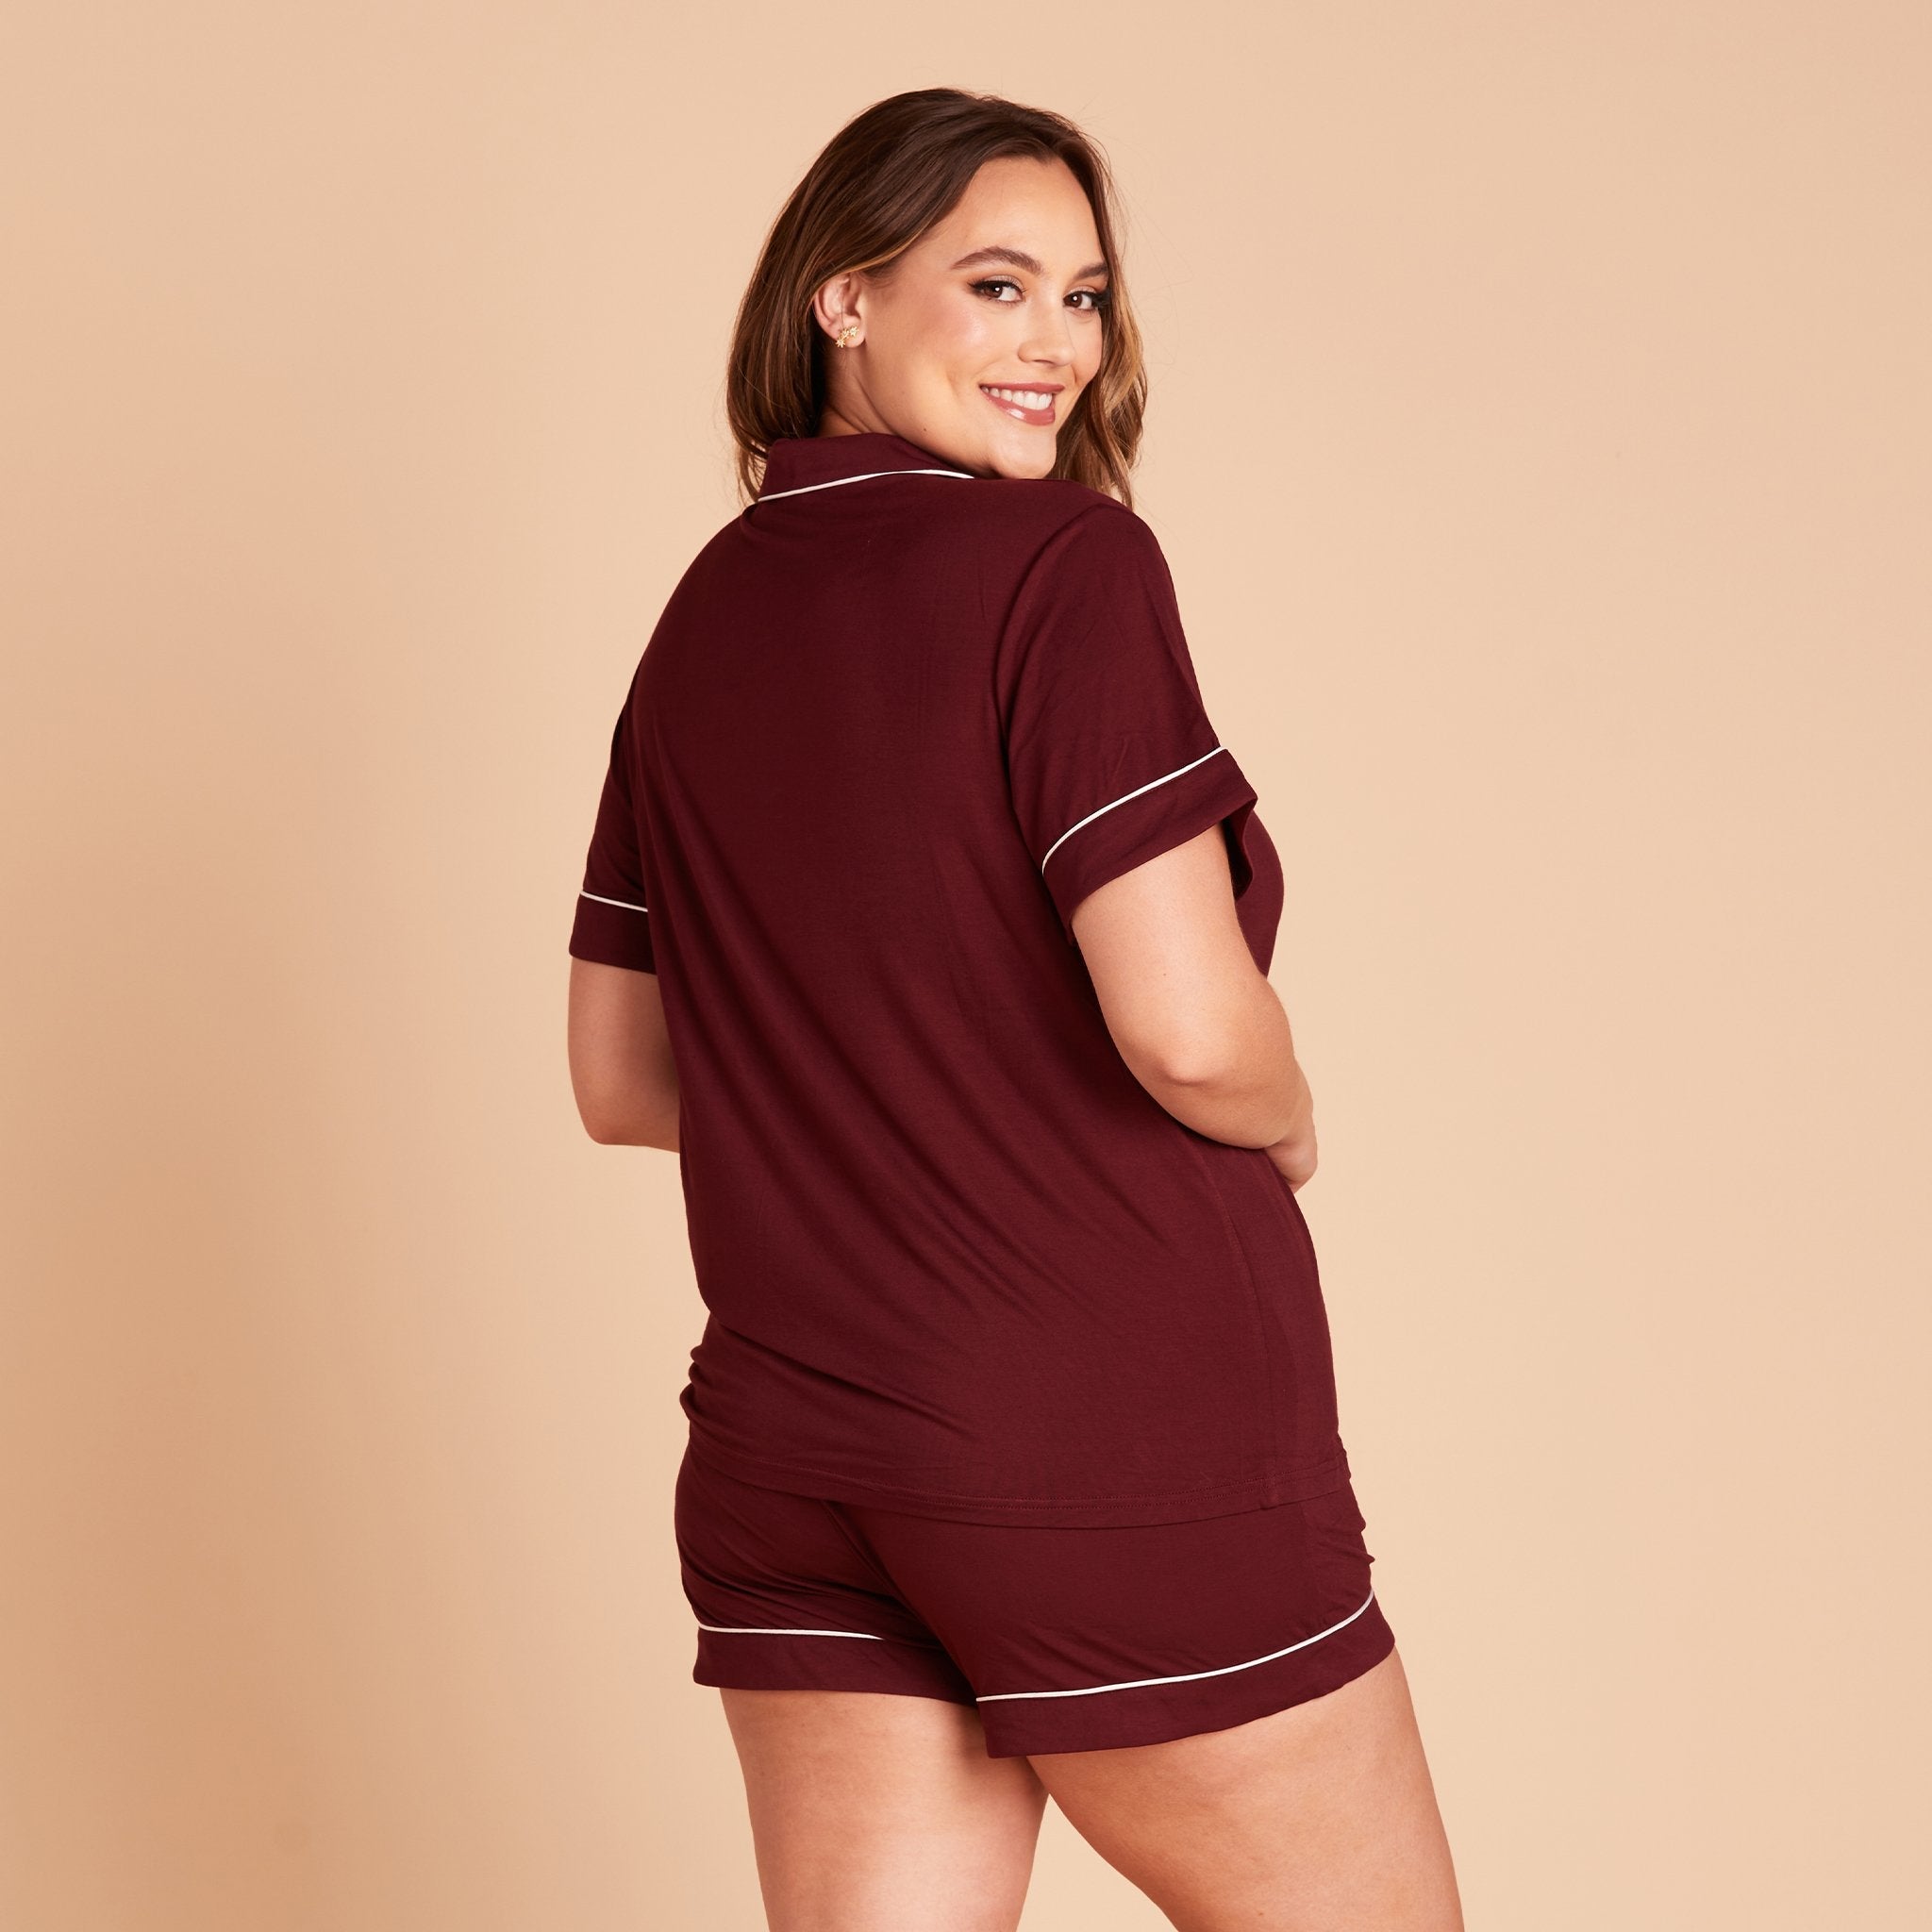 Jonny Plus Size Short Sleeve Pajama Set With White Piping in cabernet burgundy, side view